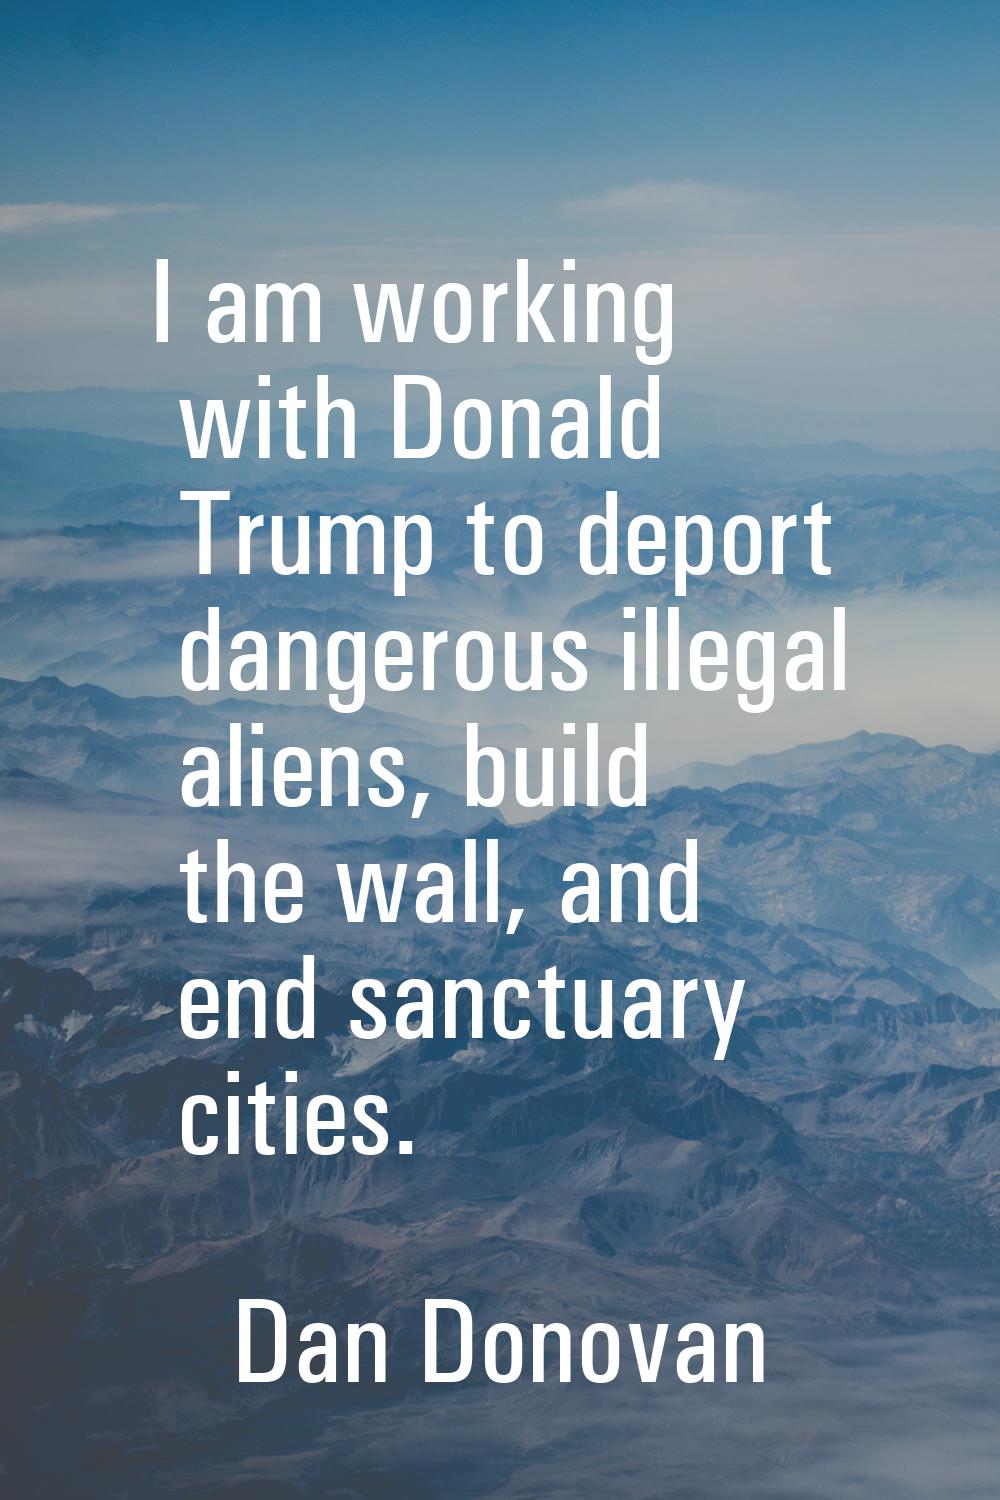 I am working with Donald Trump to deport dangerous illegal aliens, build the wall, and end sanctuar